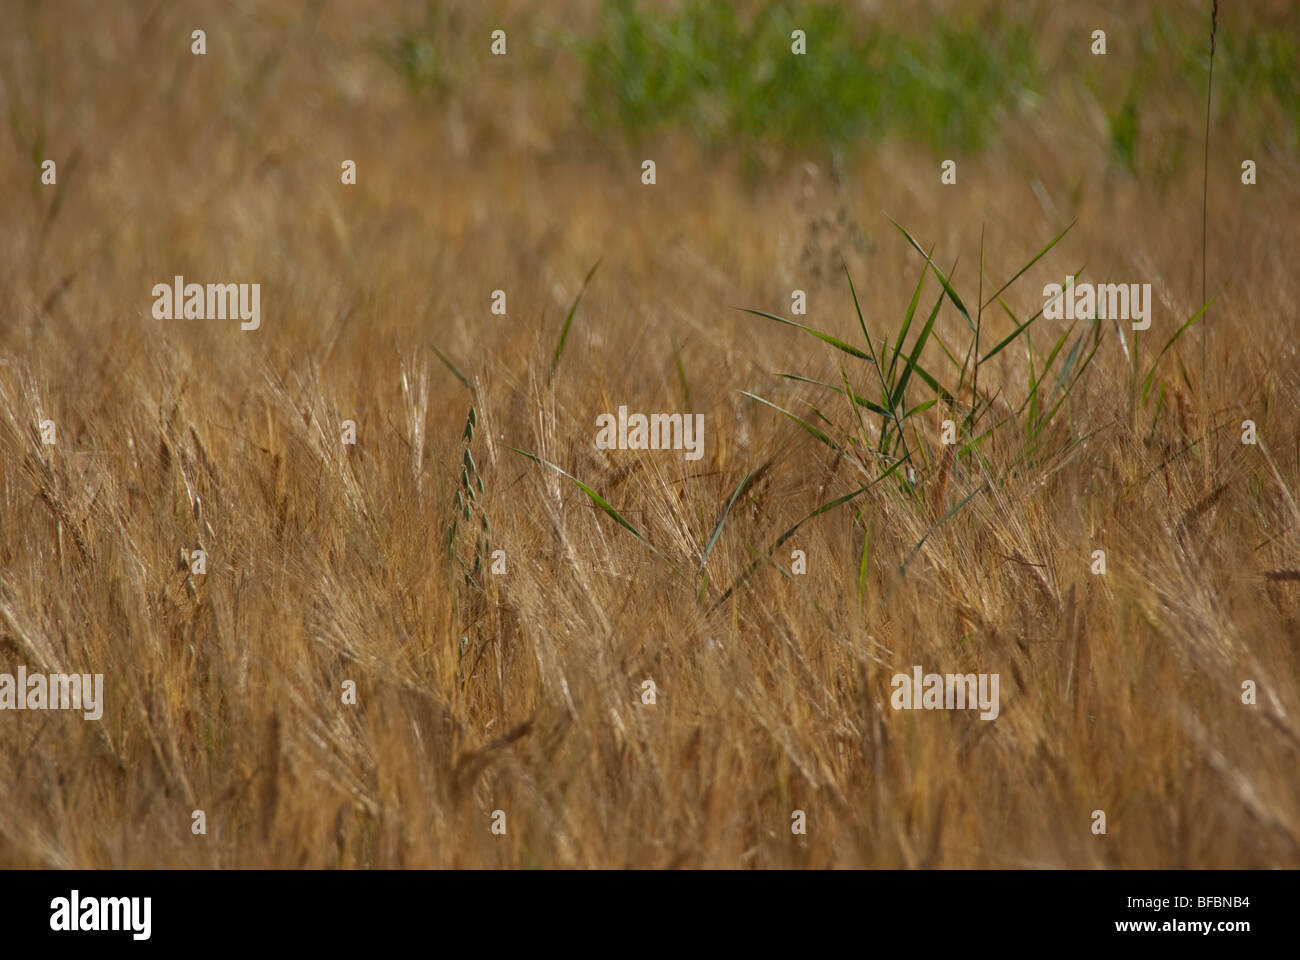 Grass blades growing amidst ripe barley field Stock Photo